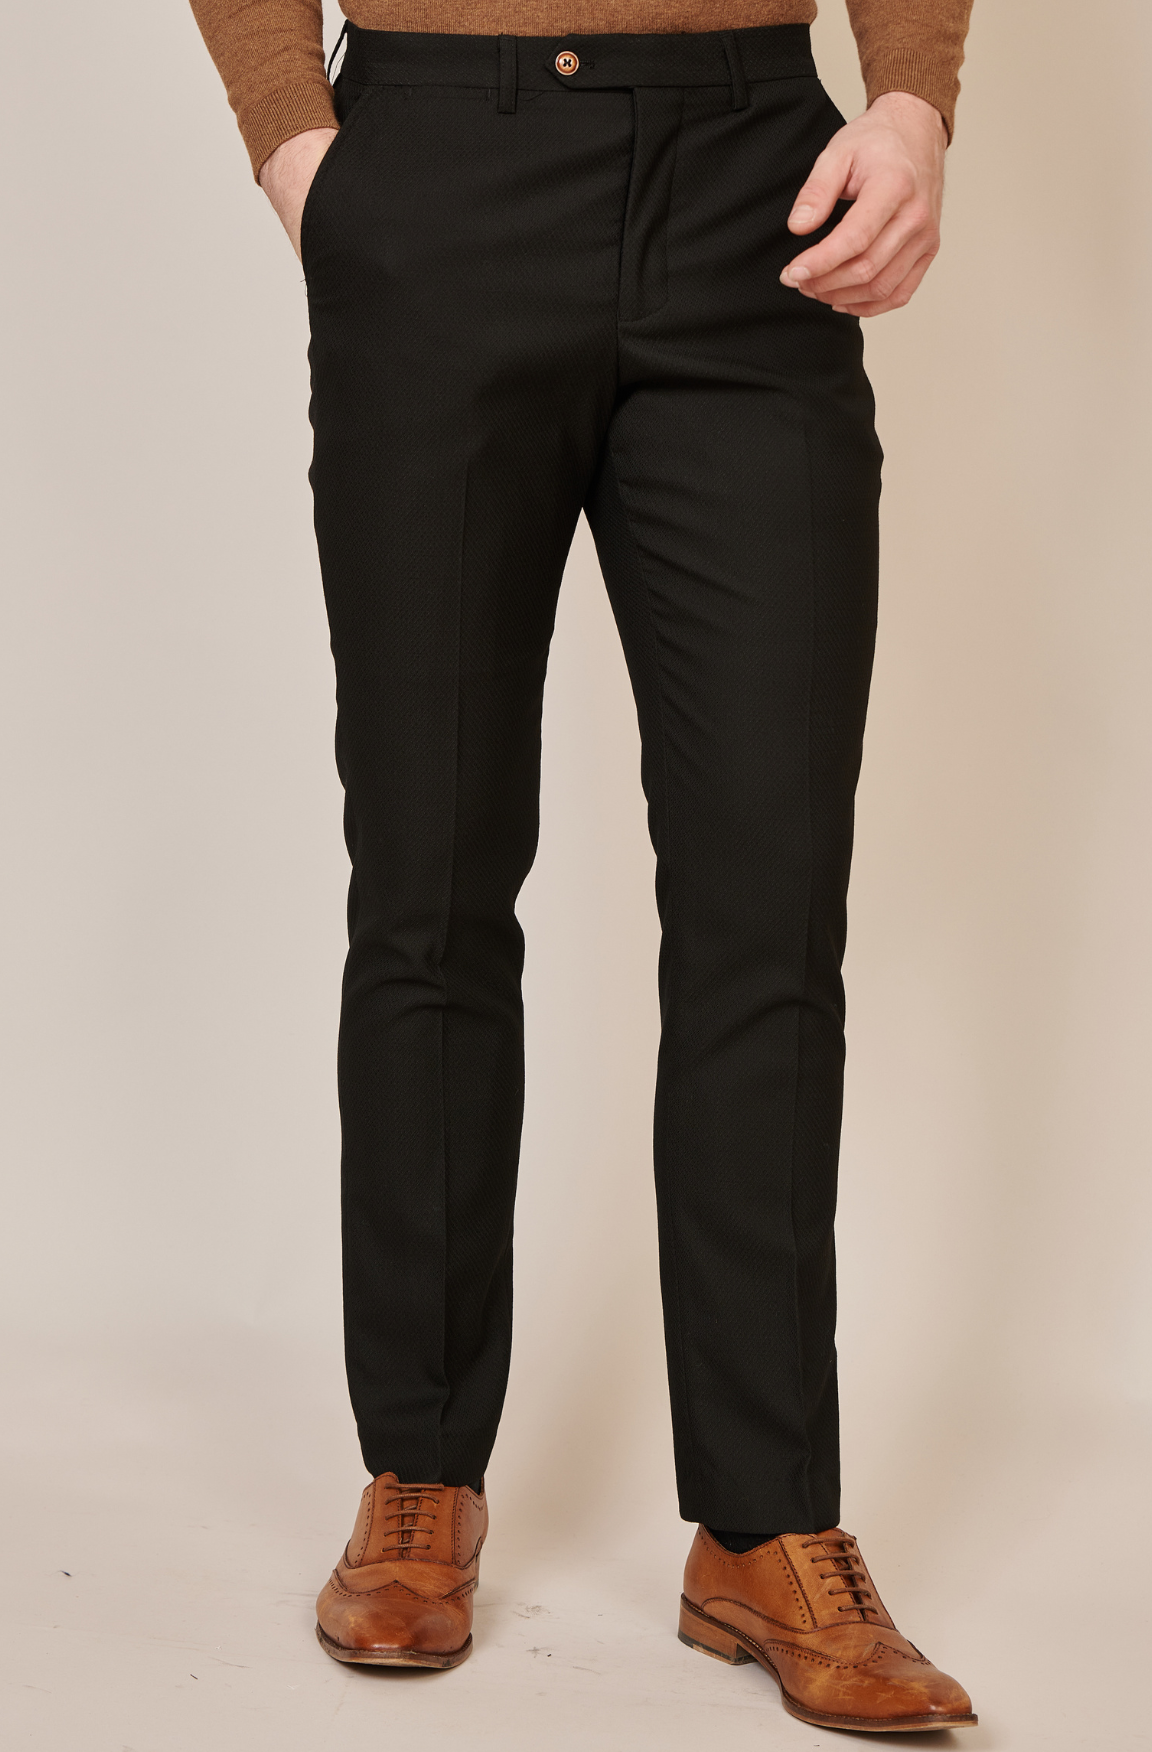 Marc Darcy Max Black Slim Fit Flat Front Trousers